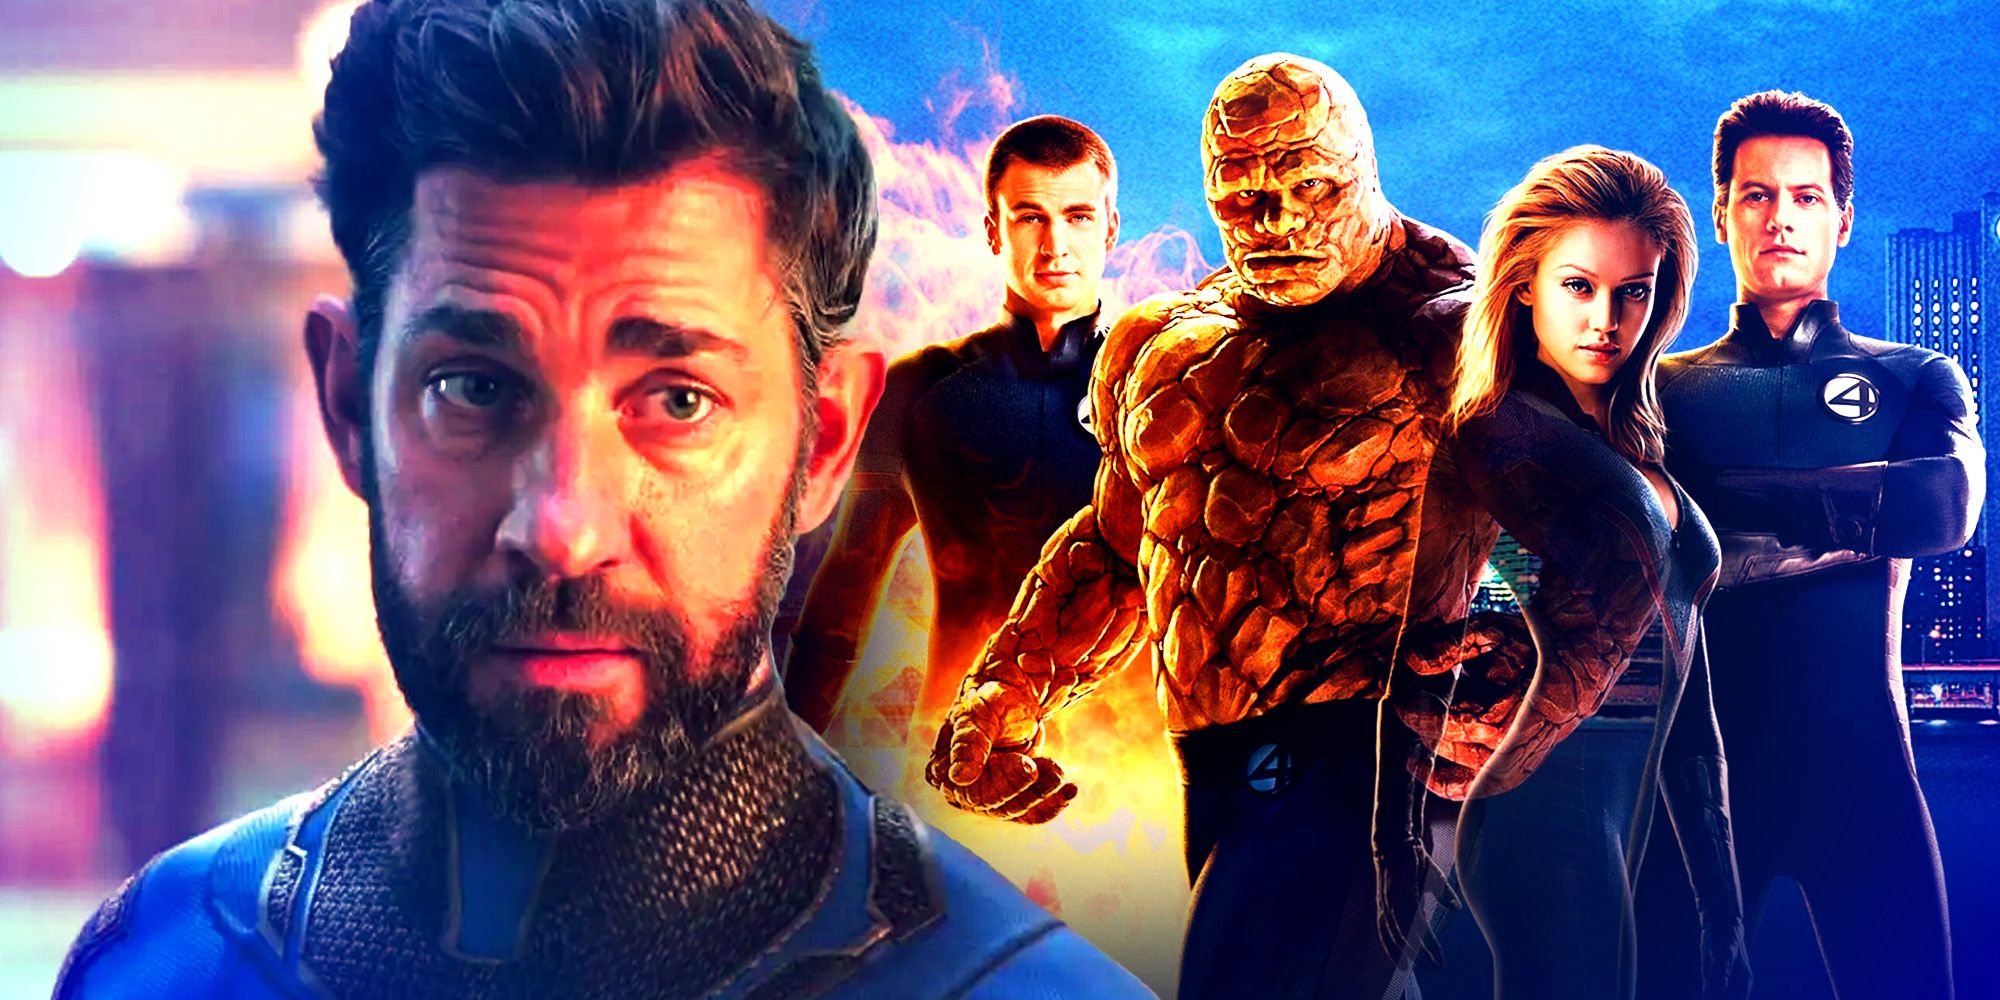 John Krasinski as Reed Richards in the MCU with the cast of Fantastic Four 2005